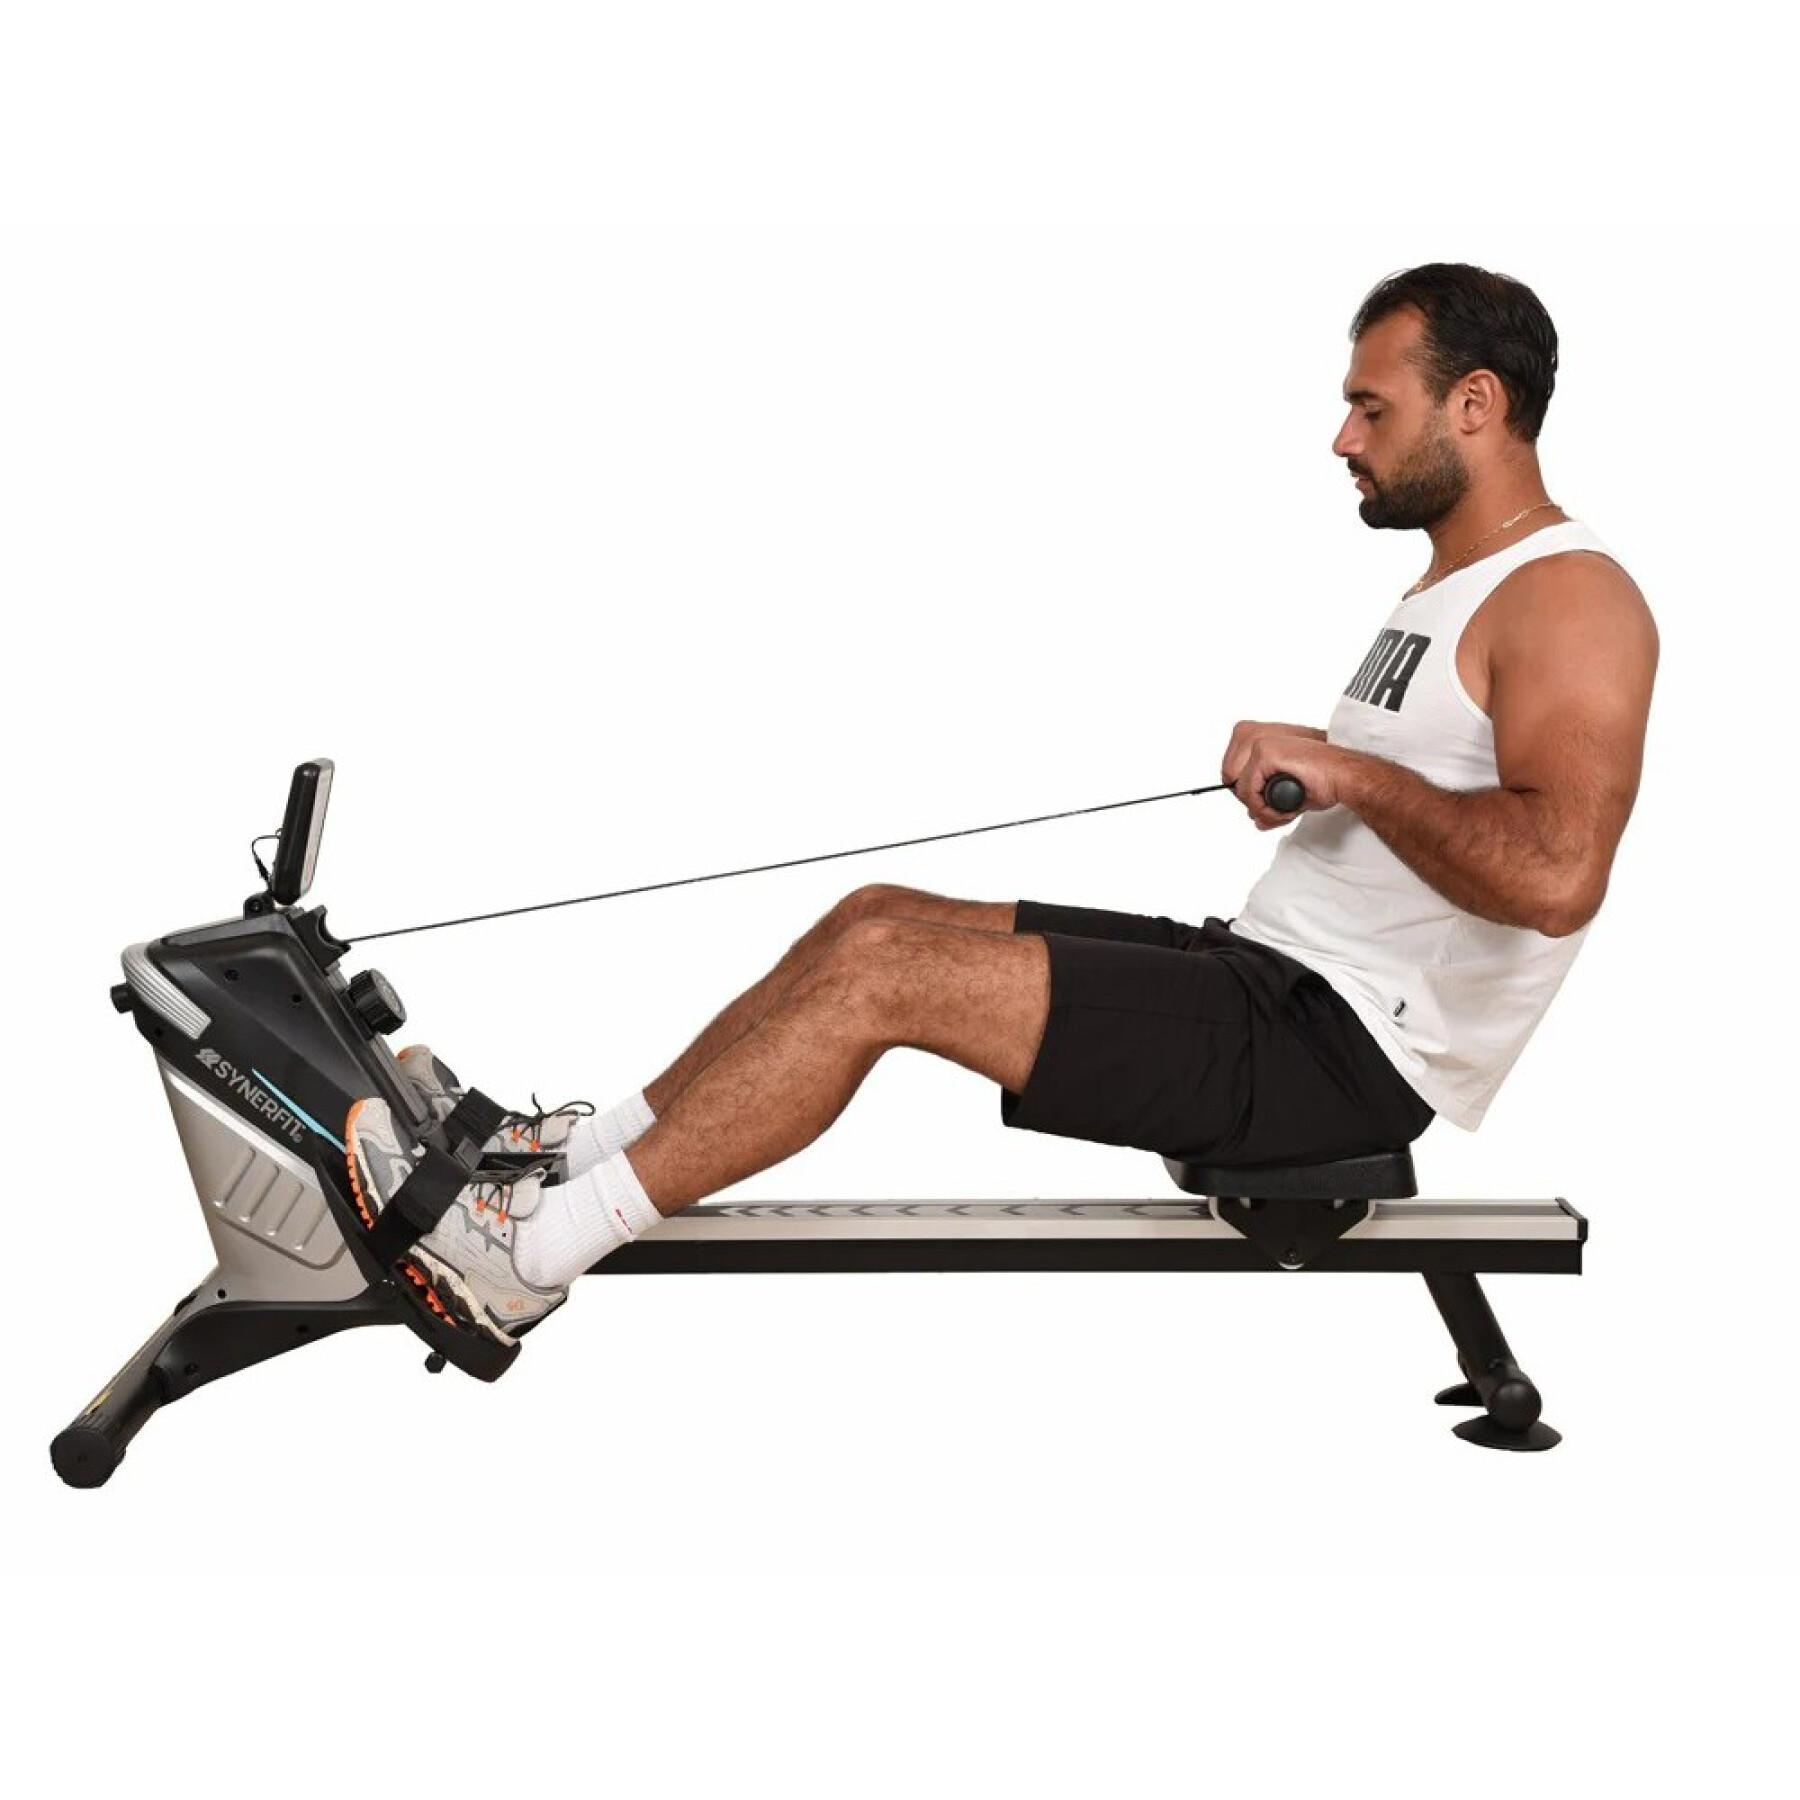 Magnetic resistance rowing machine Synerfit Fitness Lima